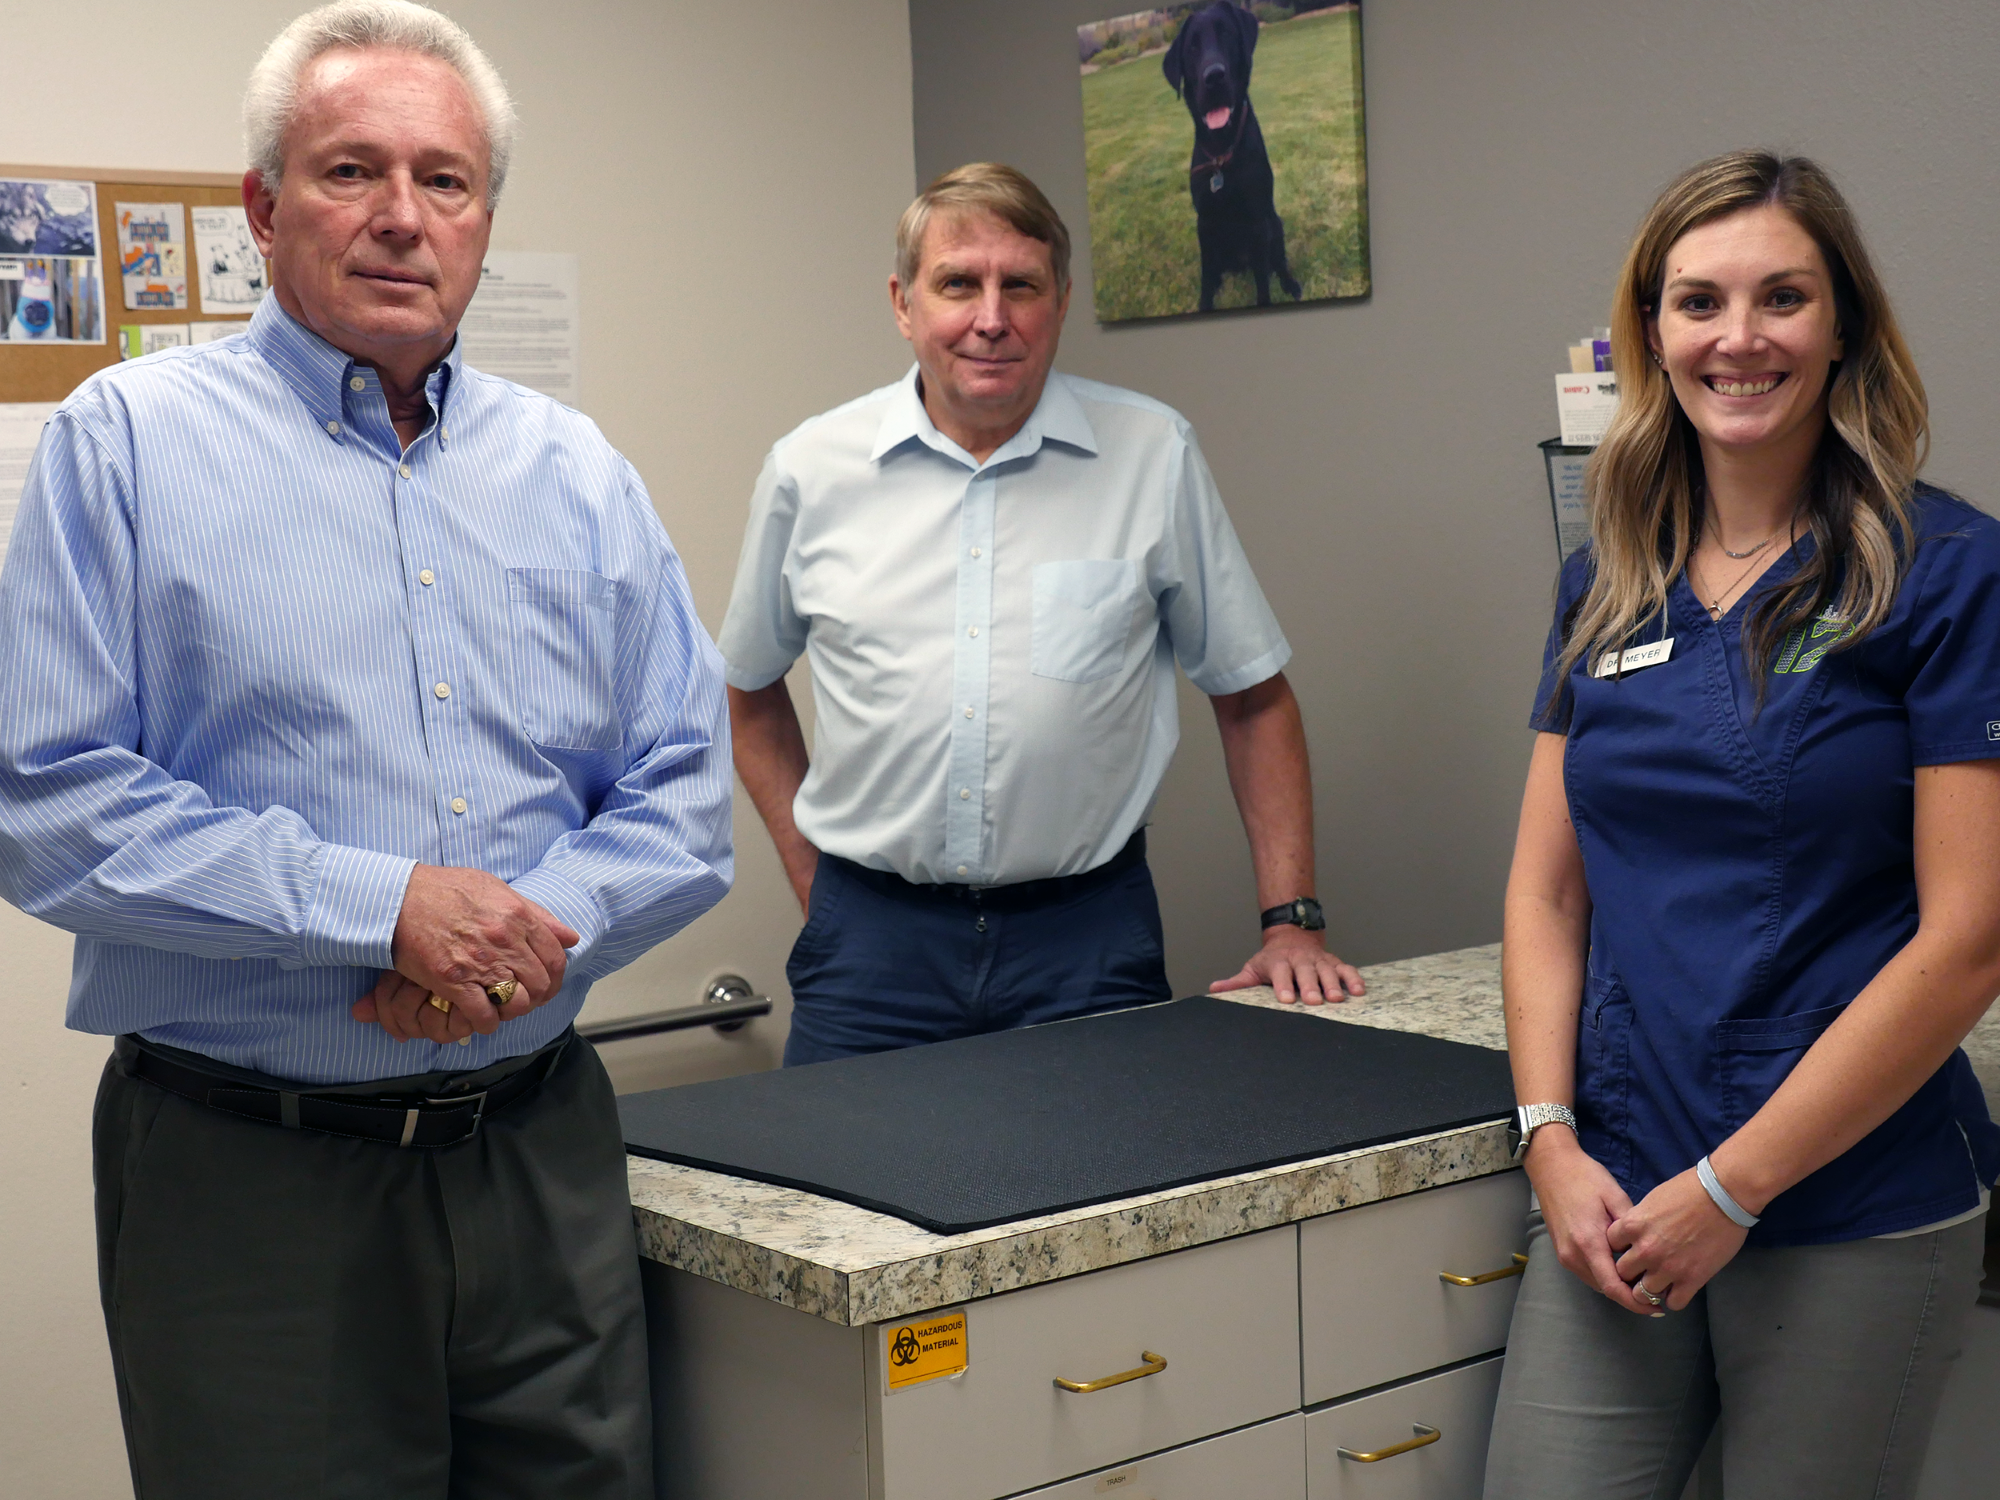 Doctors Fisher, Korenko and Meyer stand inside an animal clinic.